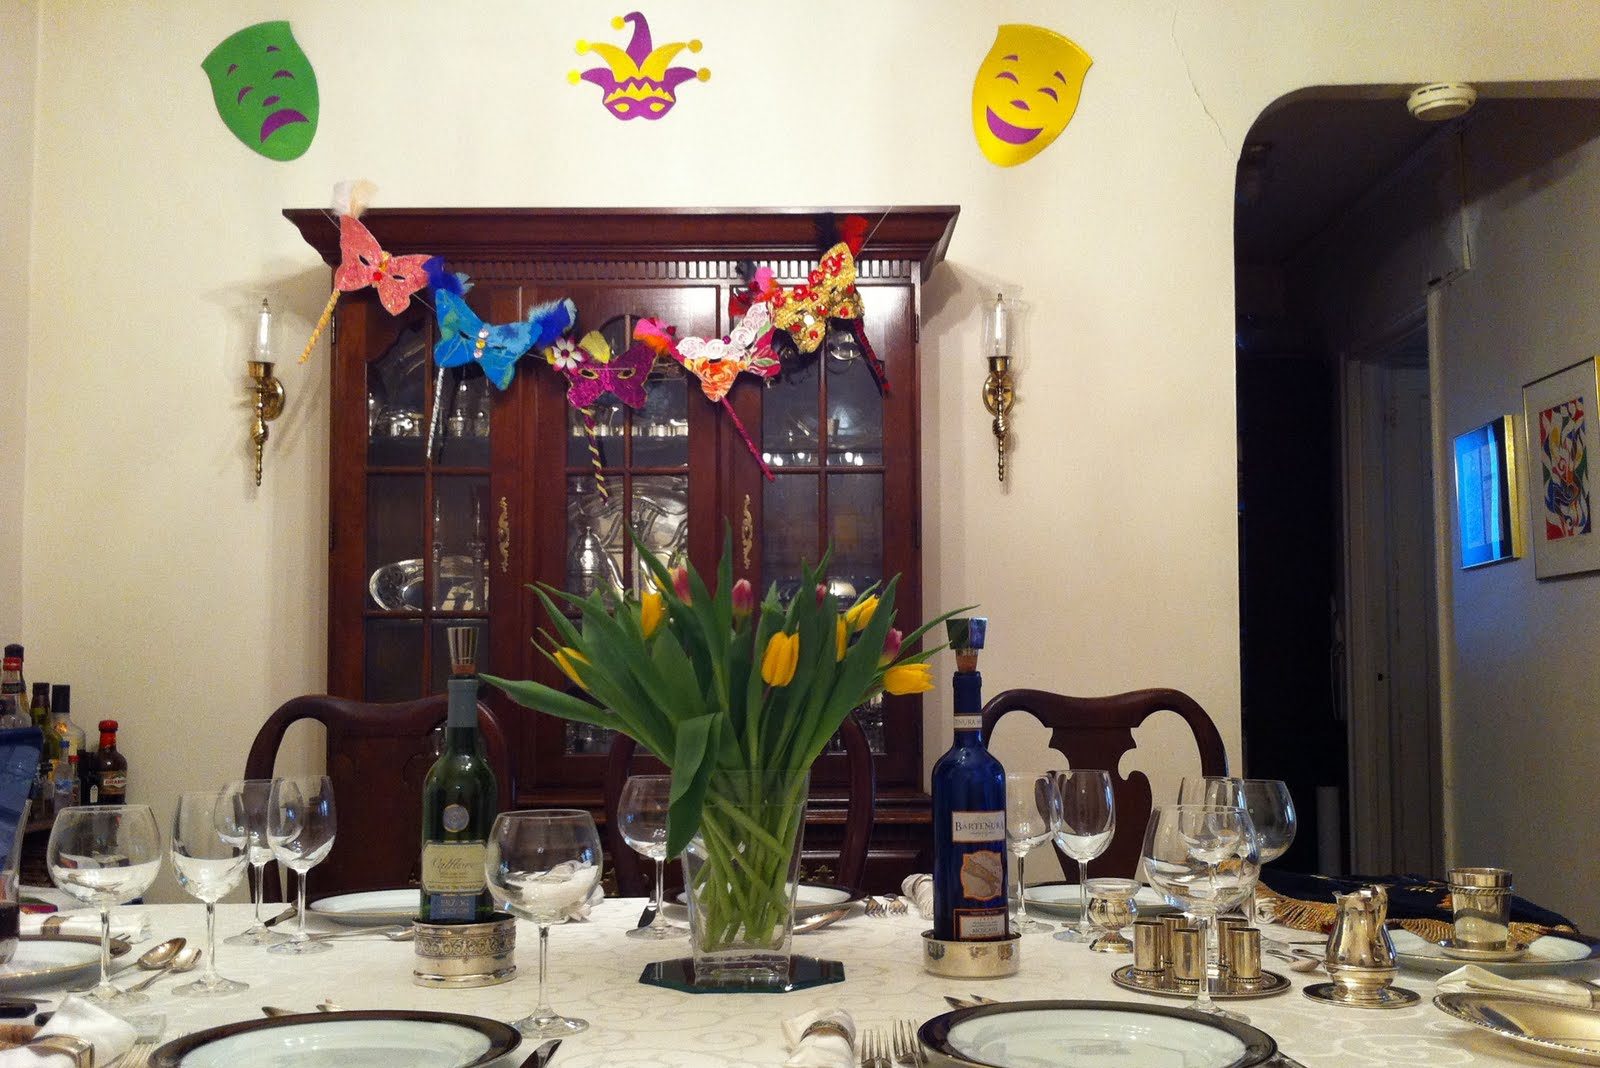 A Traditional Purim Feast Brought Up to Date